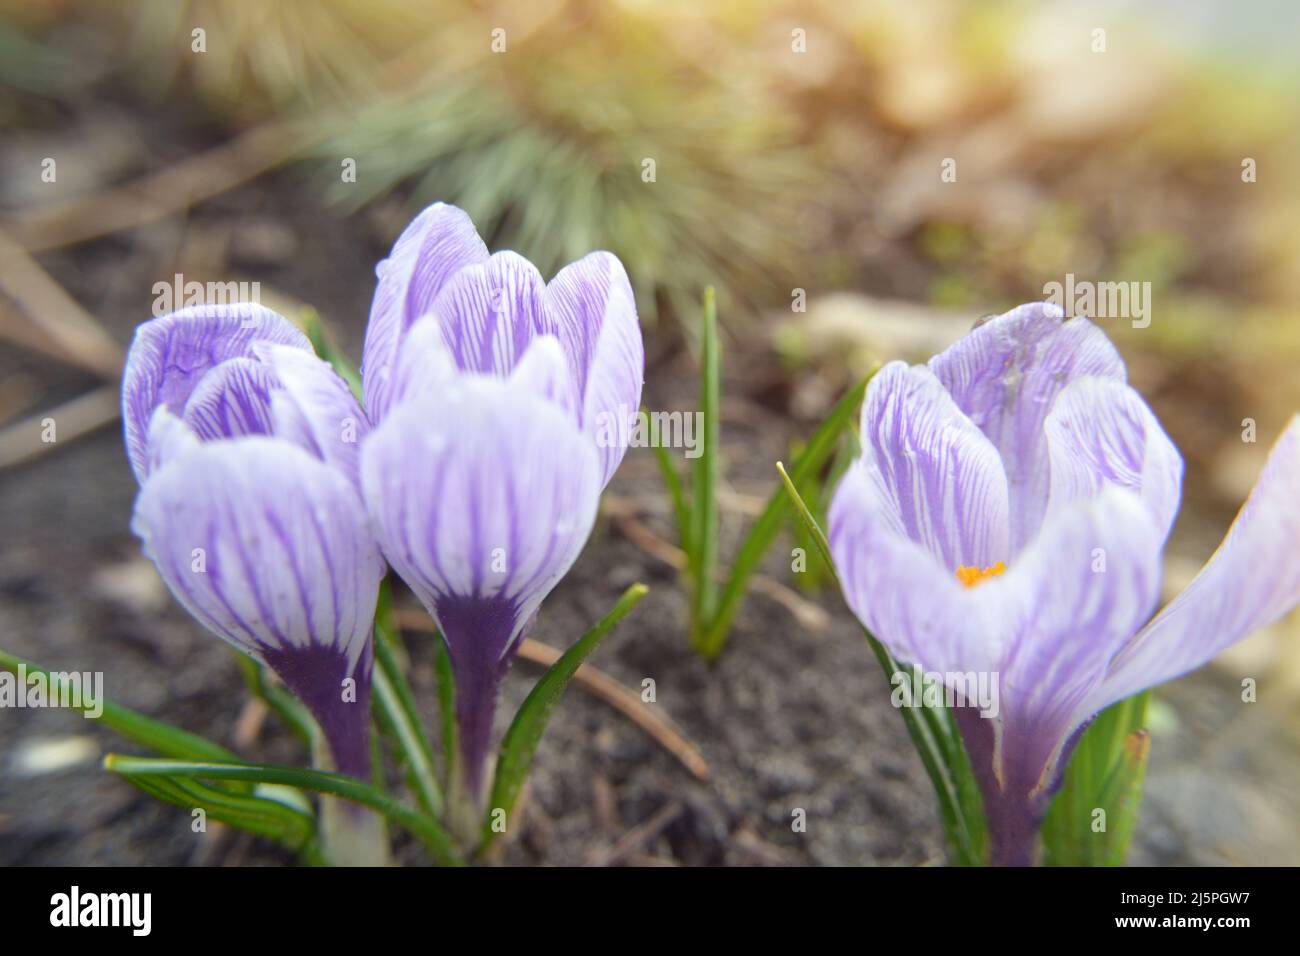 Crocus flowering in the early spring garden. Lilac crocuses at sunset. Close-up image of pretty little spring flowering. Purple crocus growing from ea Stock Photo